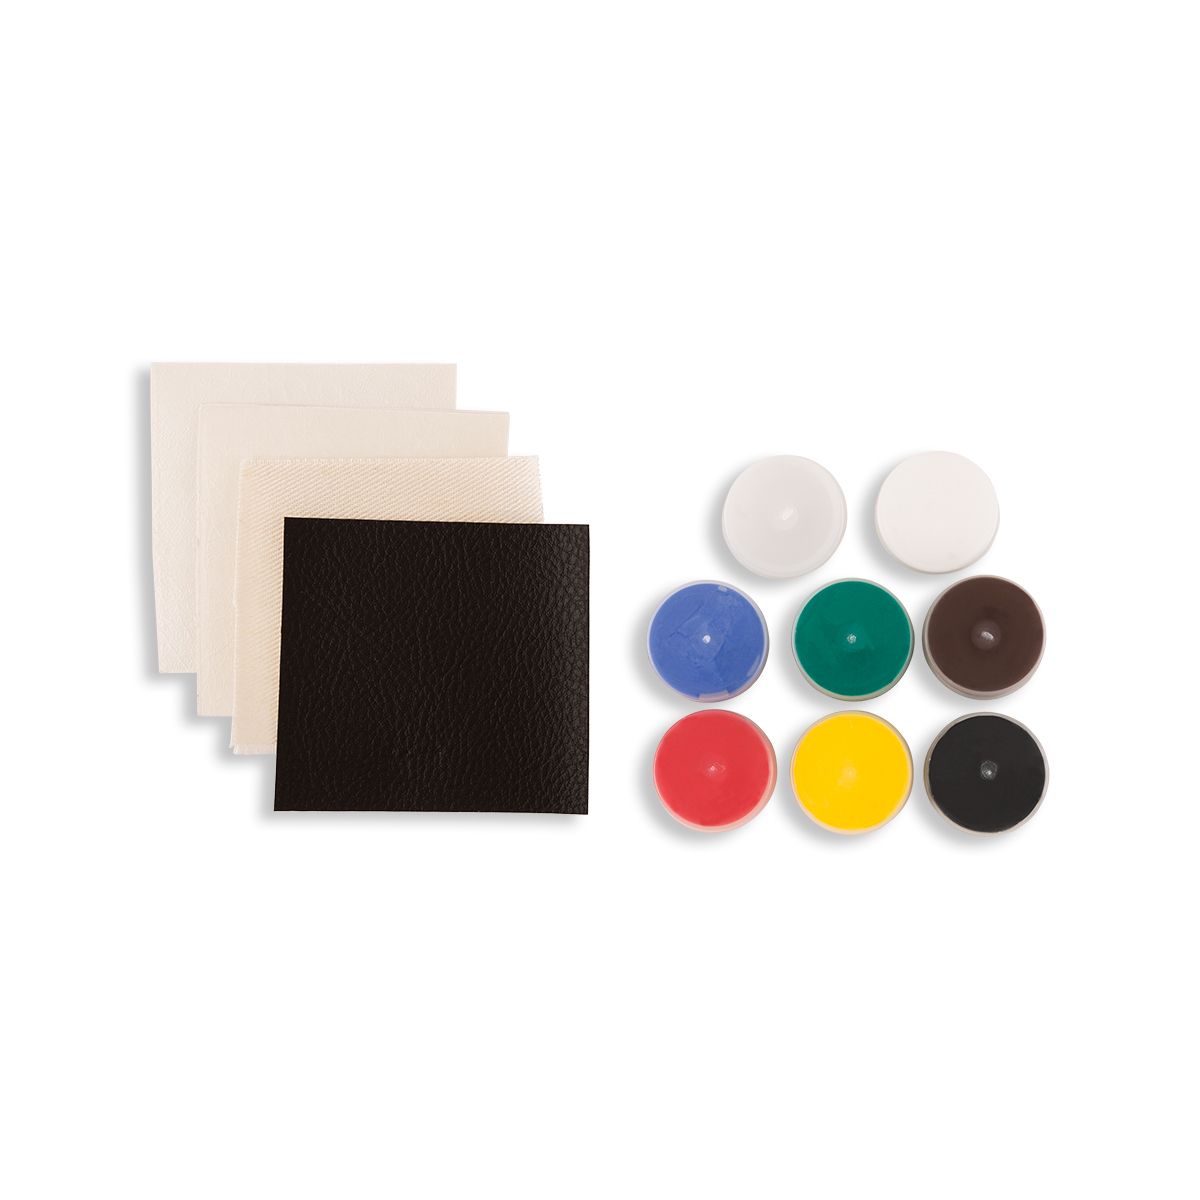 RESTOR-IT Leather and Vinyl Repair Kit: For Leather and Vinyl